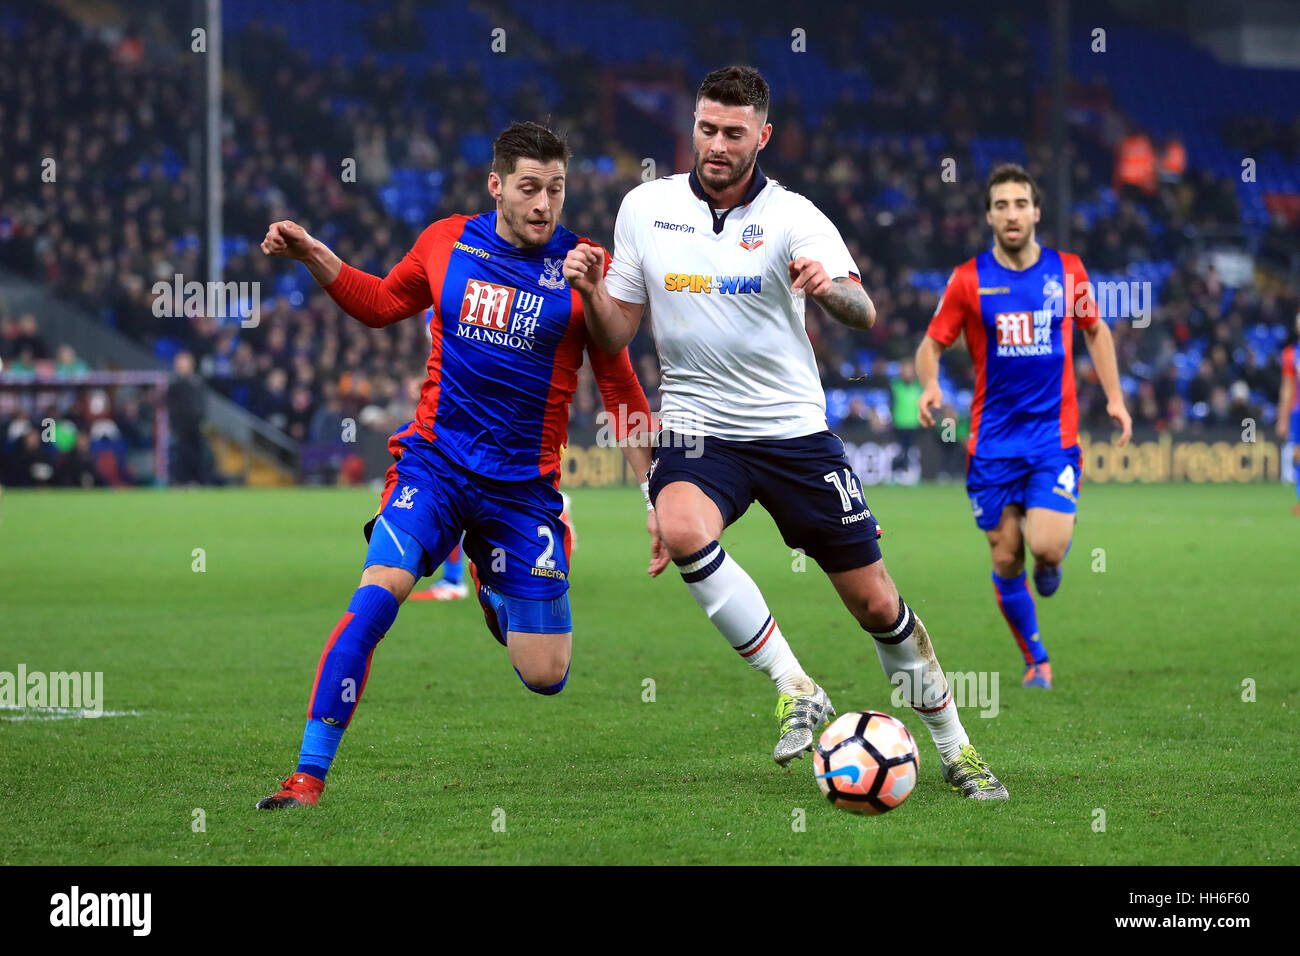 Crystal Palace's Joel Ward (left) and Bolton Wanderers' Gary Madine battle for the ball during the Emirates FA Cup, third round replay match at Selhurst Park, London. Stock Photo